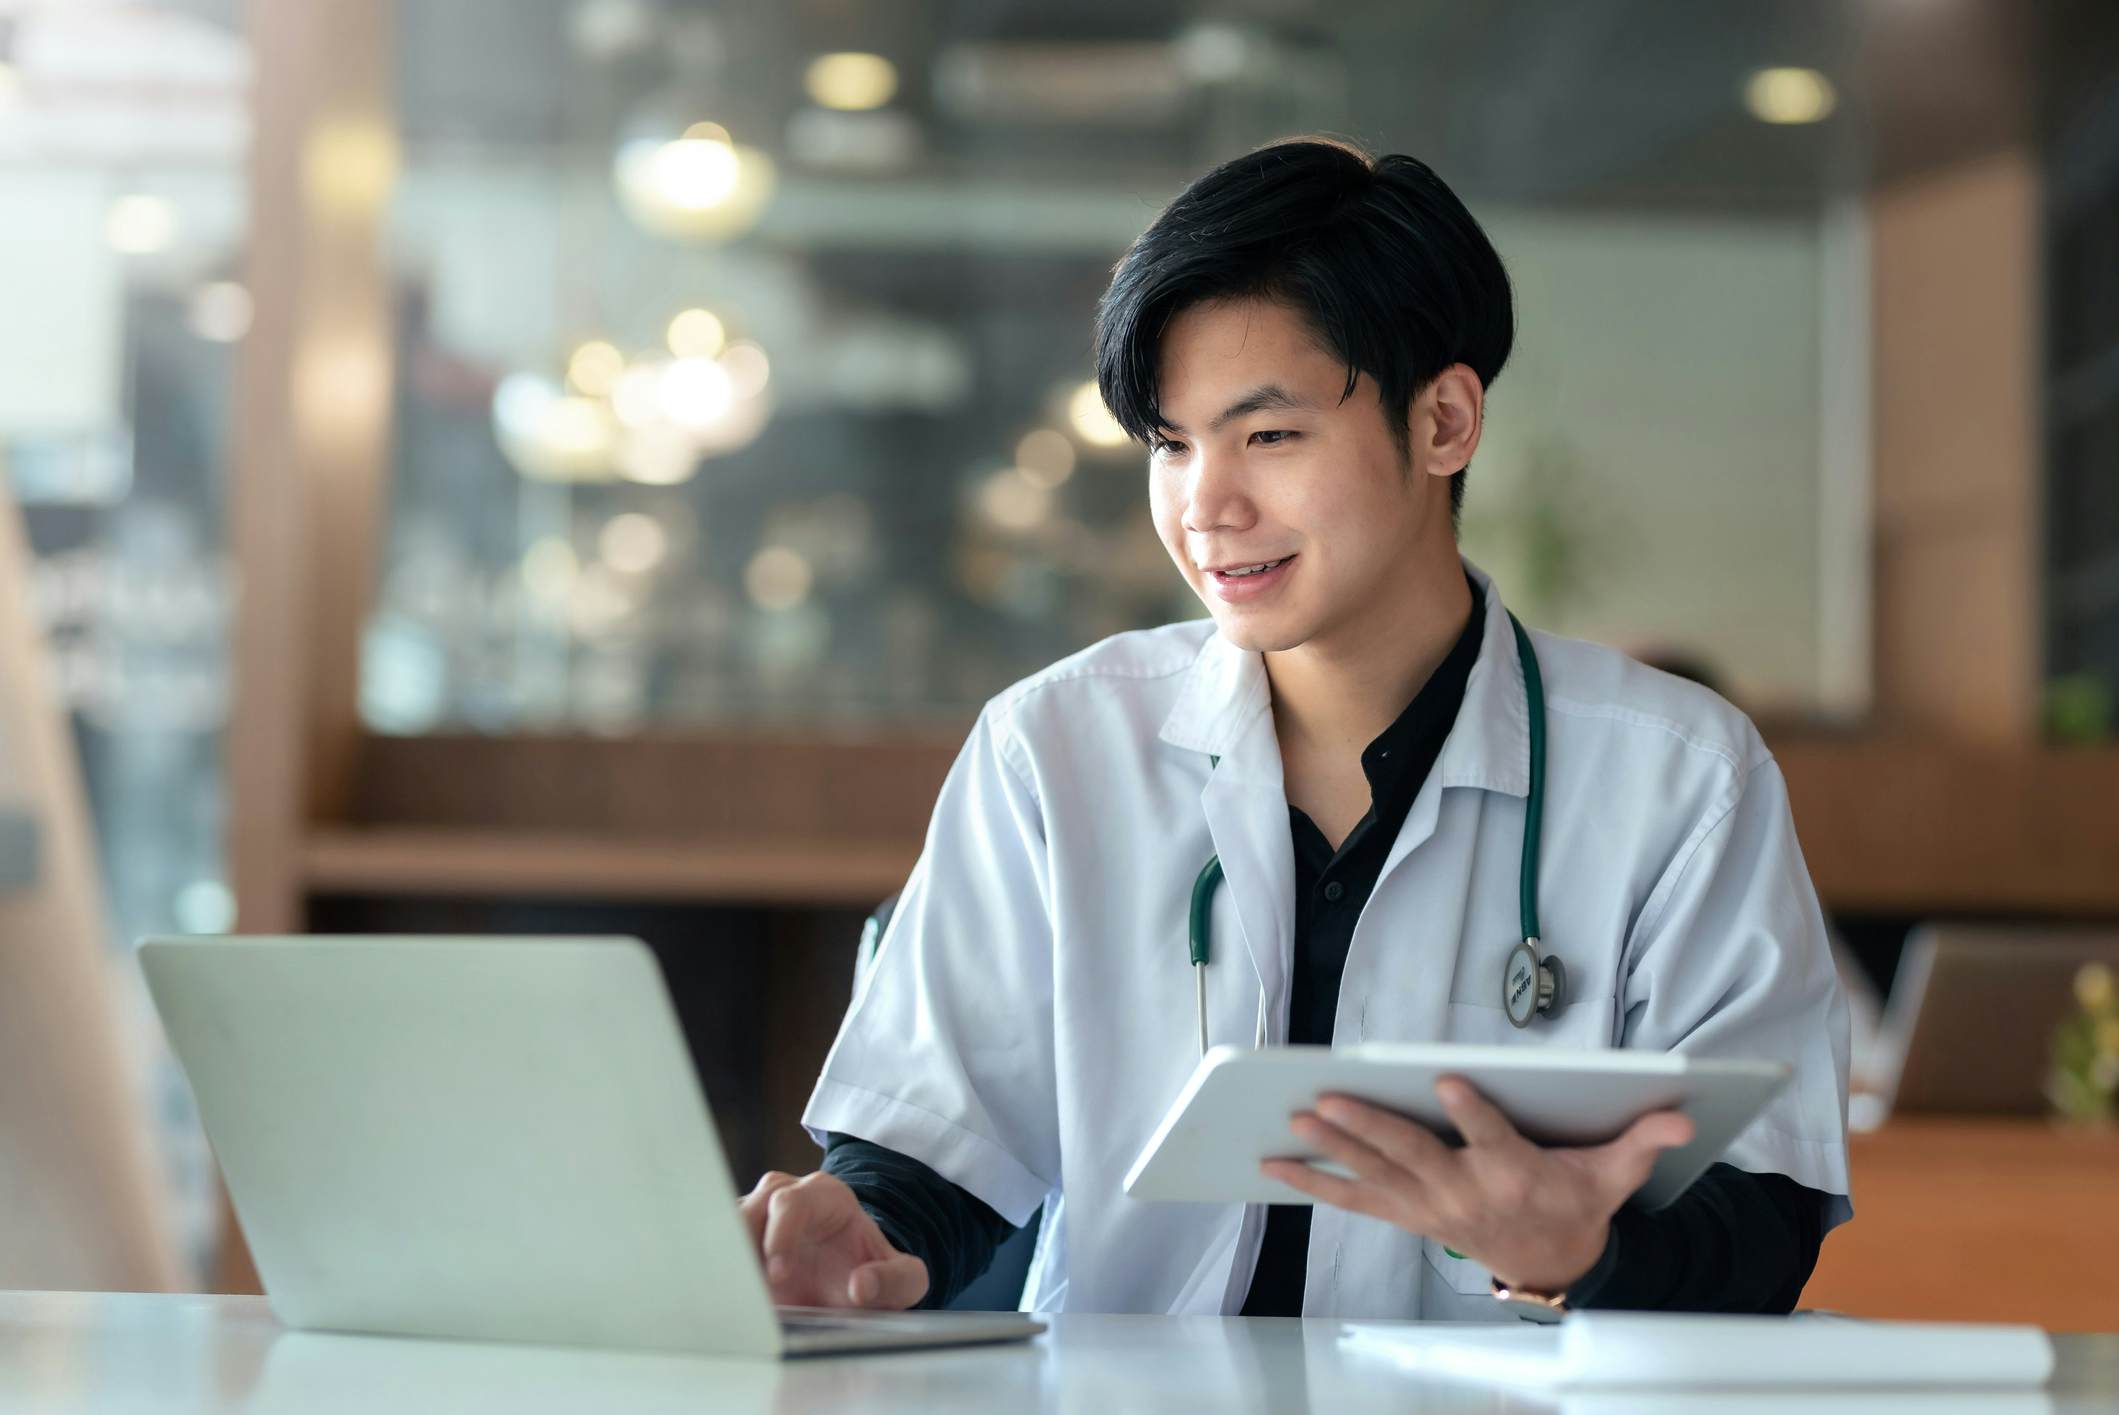 Male student studying medicine on his laptop